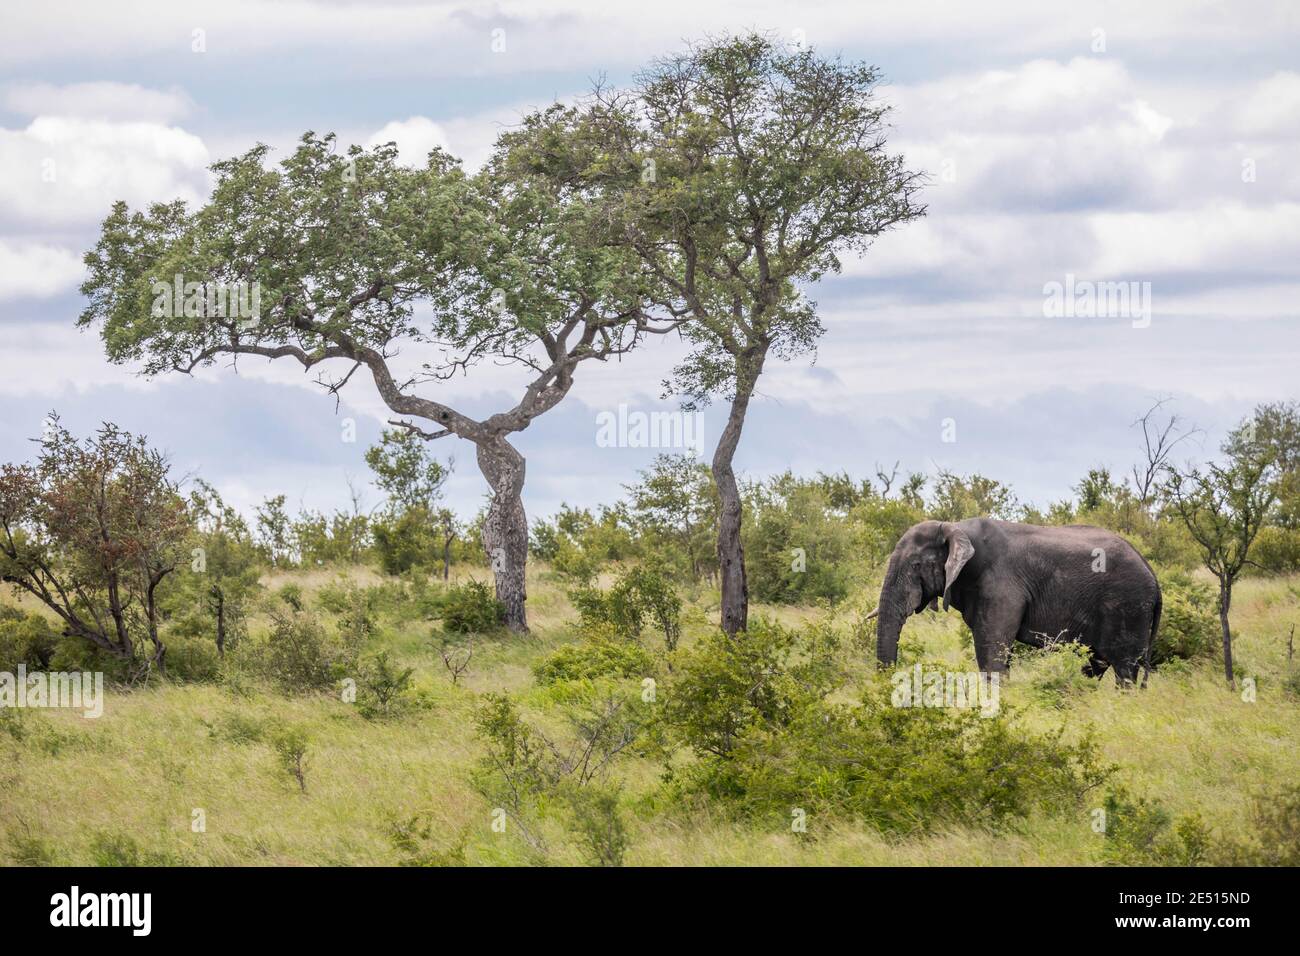 Iconic south african landscape with a large adult elephant grazing in the savanna close to two solitary trees, under a blue sky with puffy clouds Stock Photo